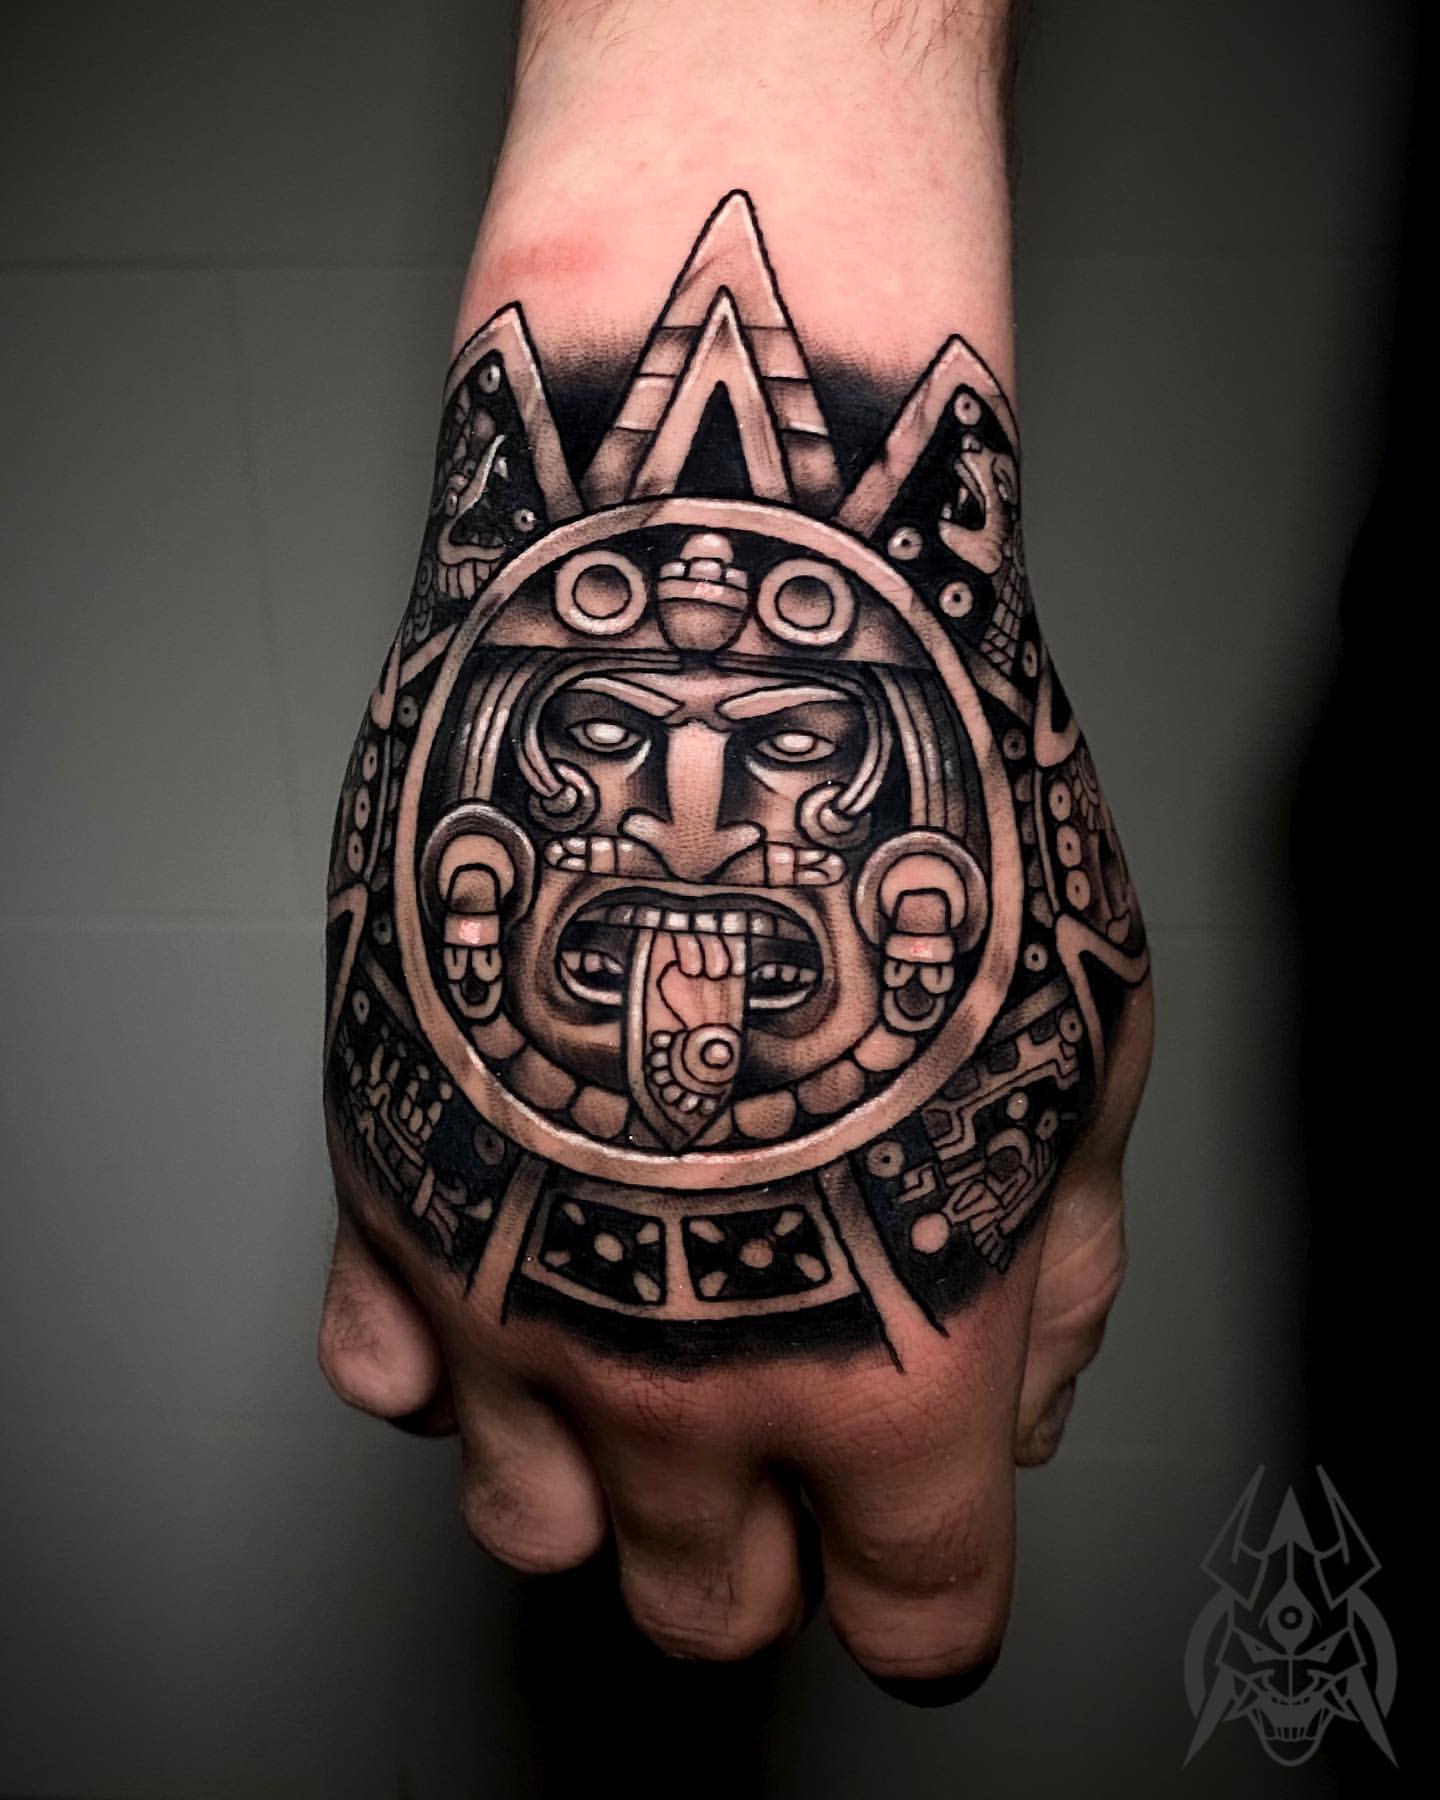 Tribal Shop Tattoo's and Piercings